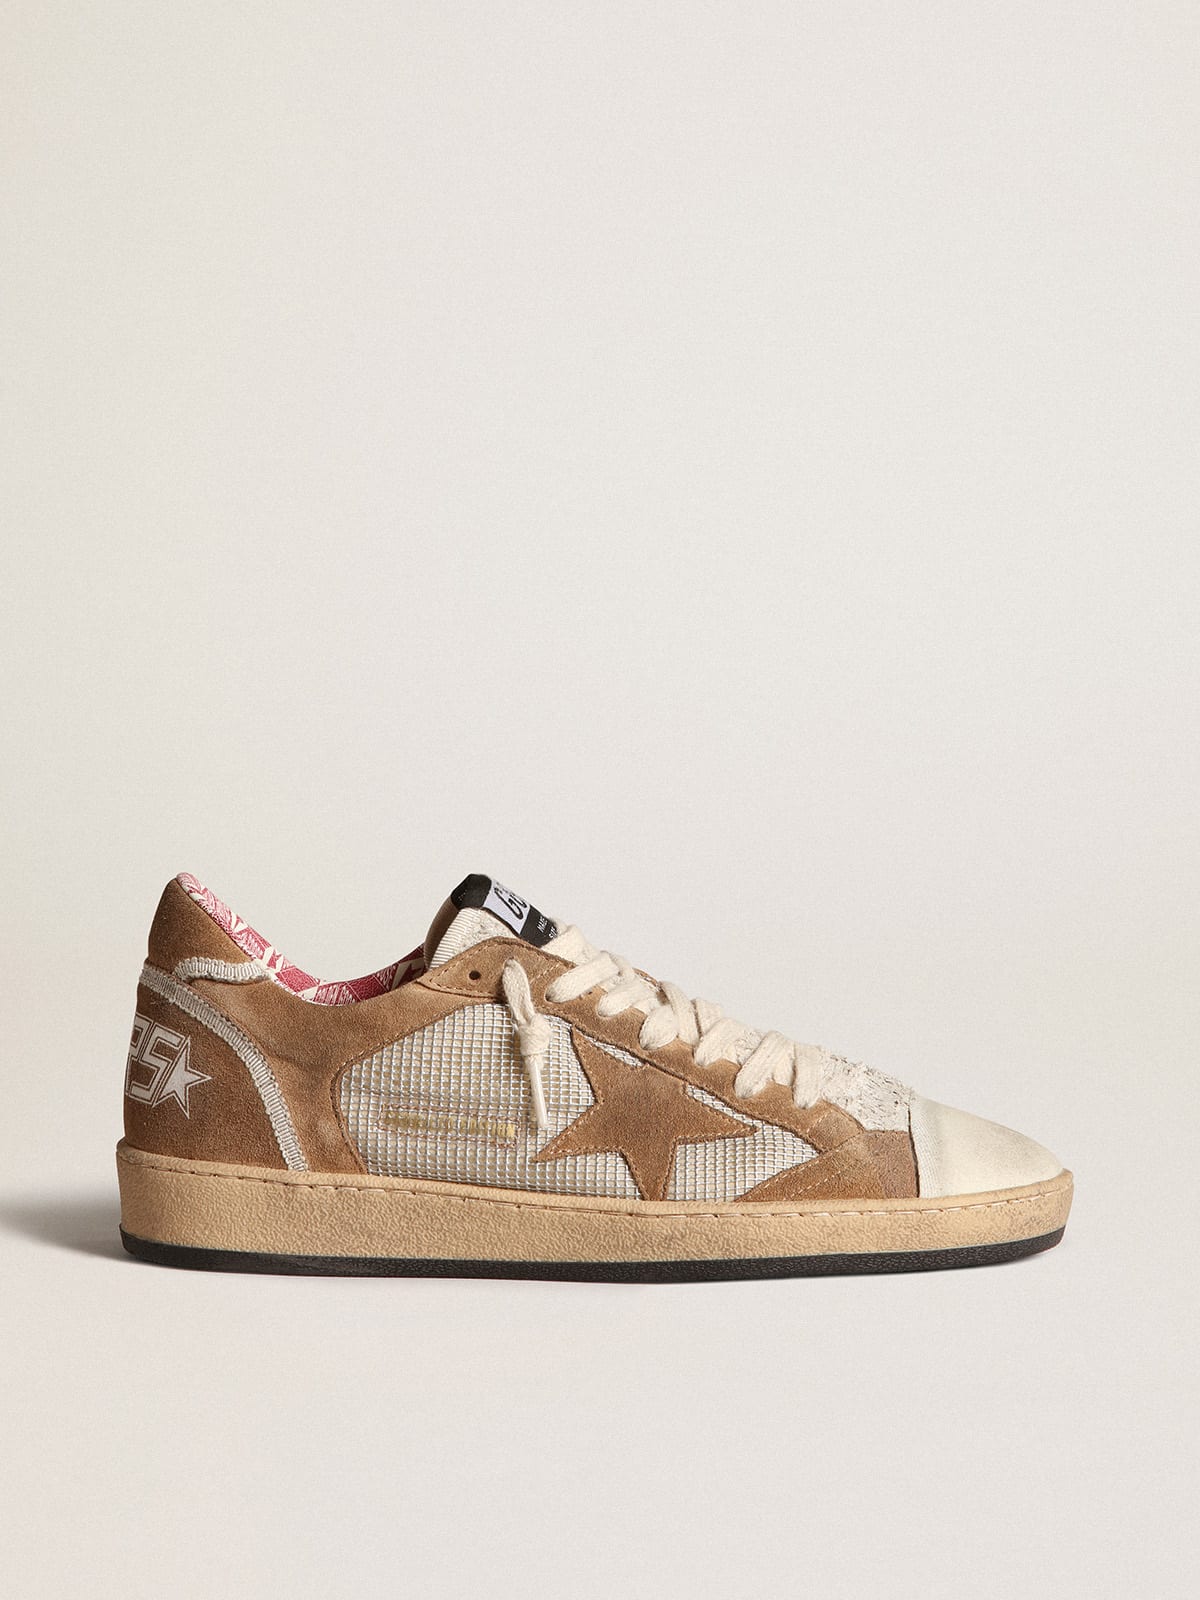 Golden Goose - Women's Ball Star LAB in buff-colored suede  in 